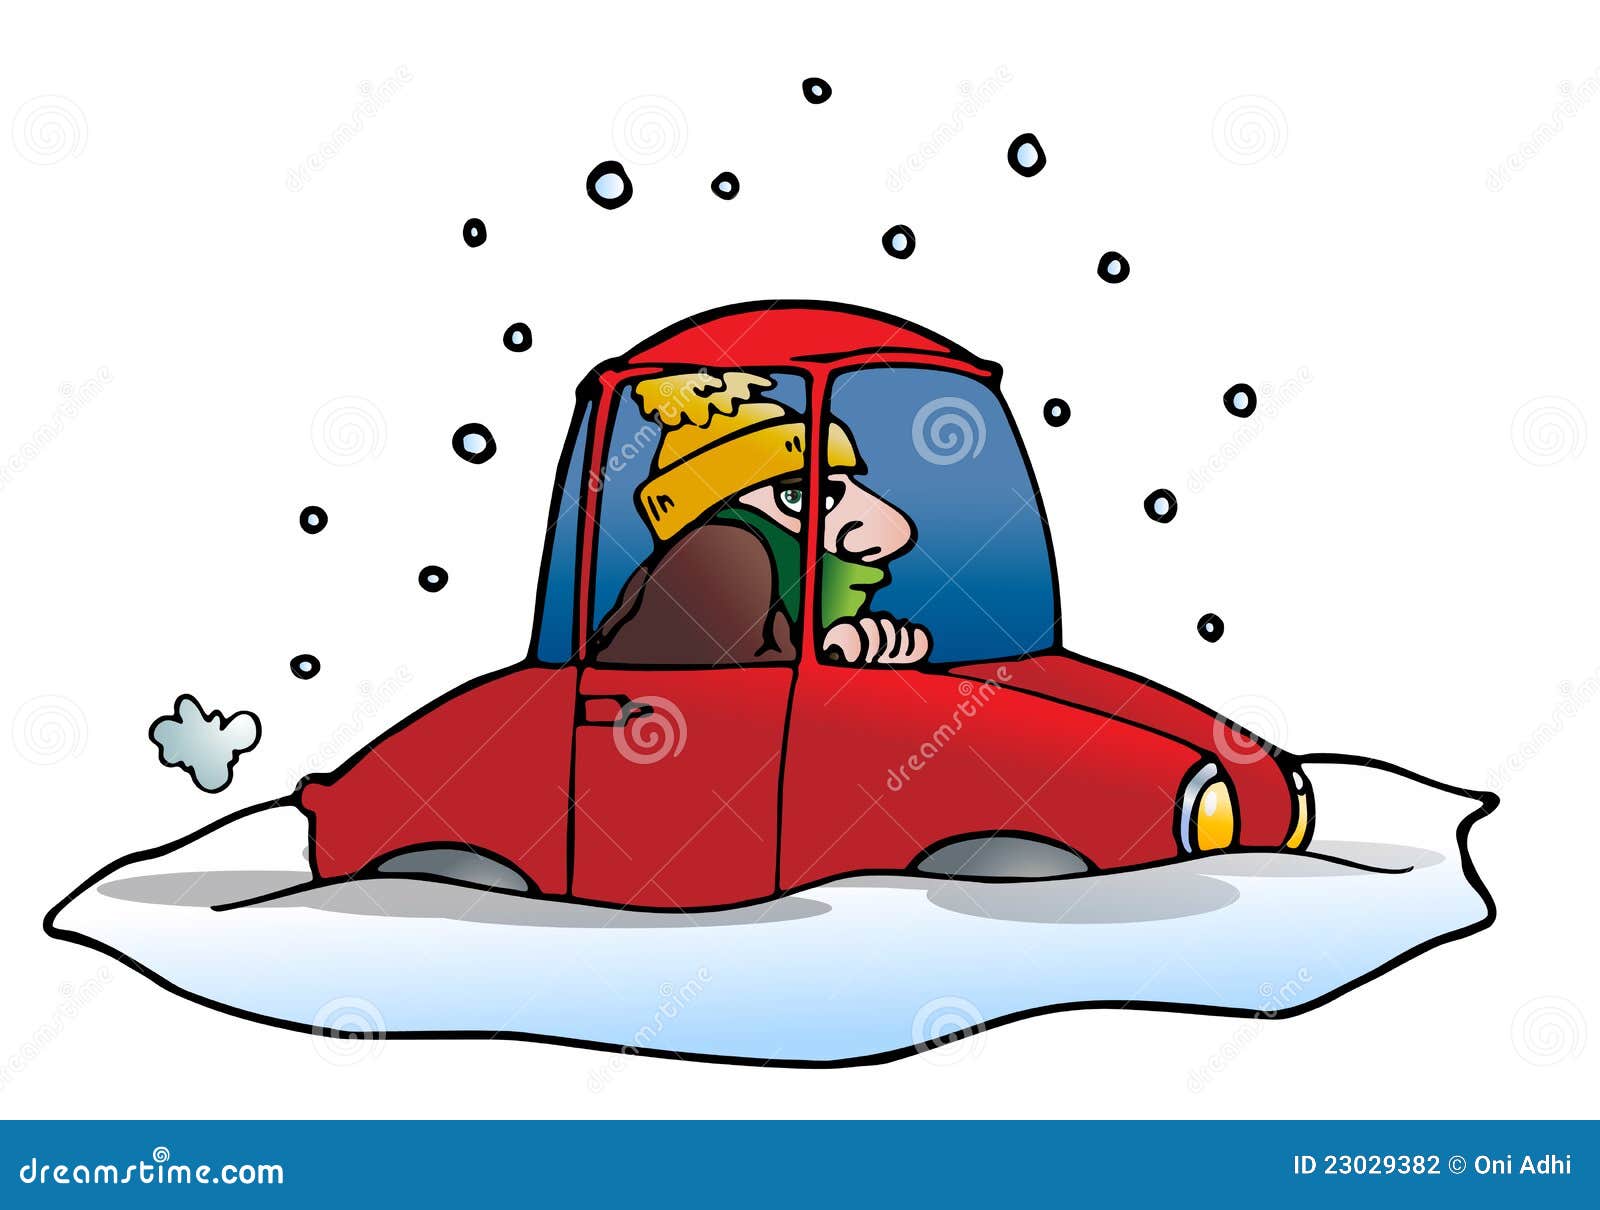 clipart car stuck in snow - photo #14